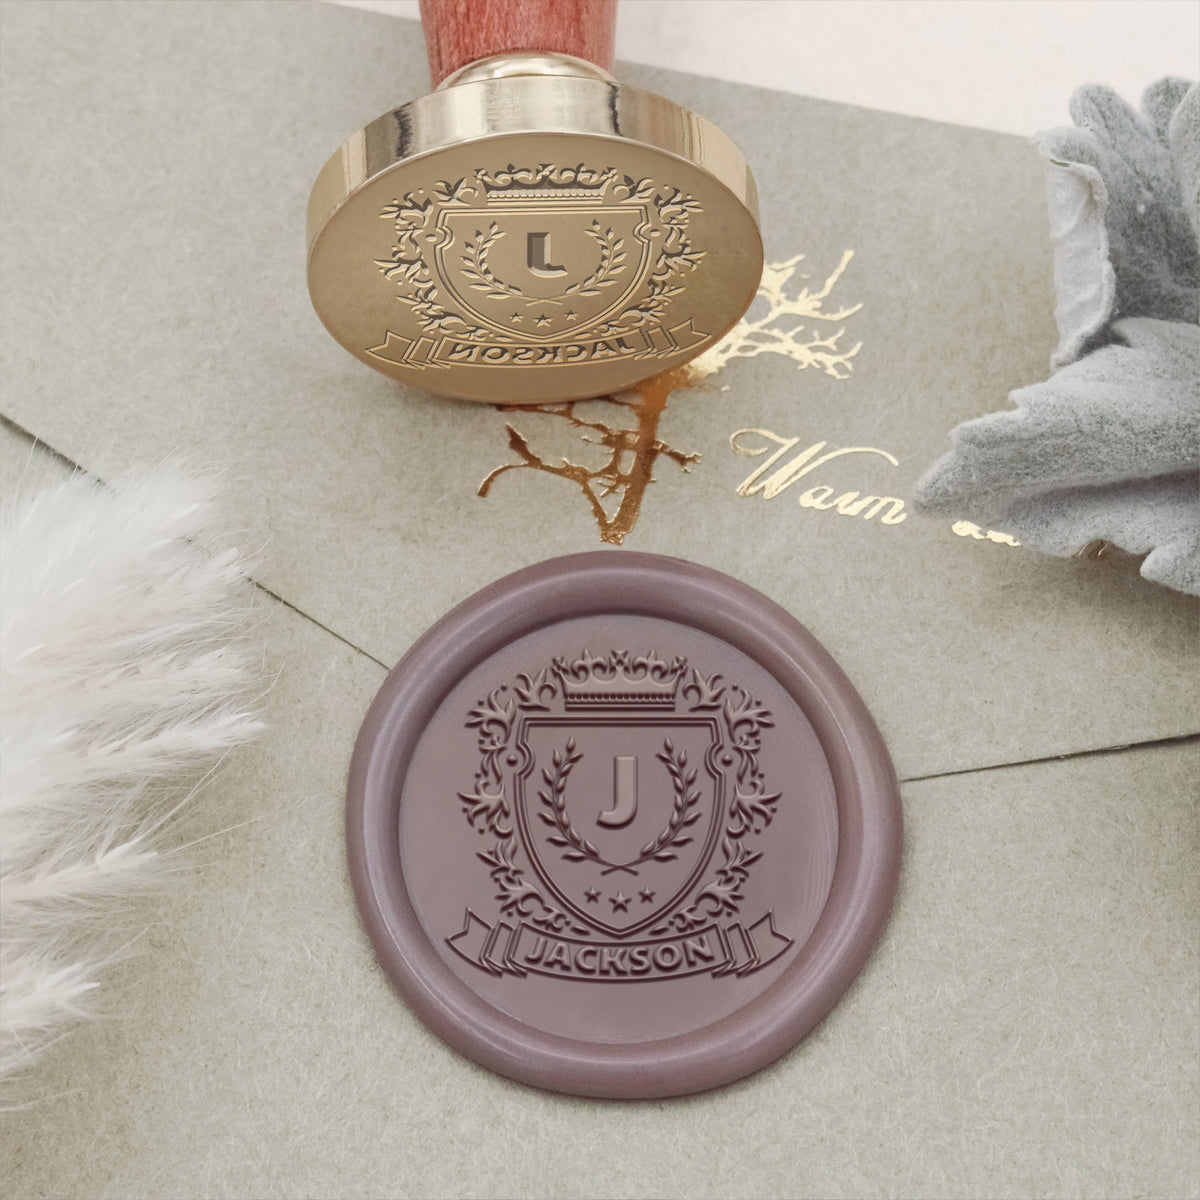 Custom Wax Seal Stamp - Custom Family Crest Wax Seal Stamp with Name, Initial, or Totem - Style 17